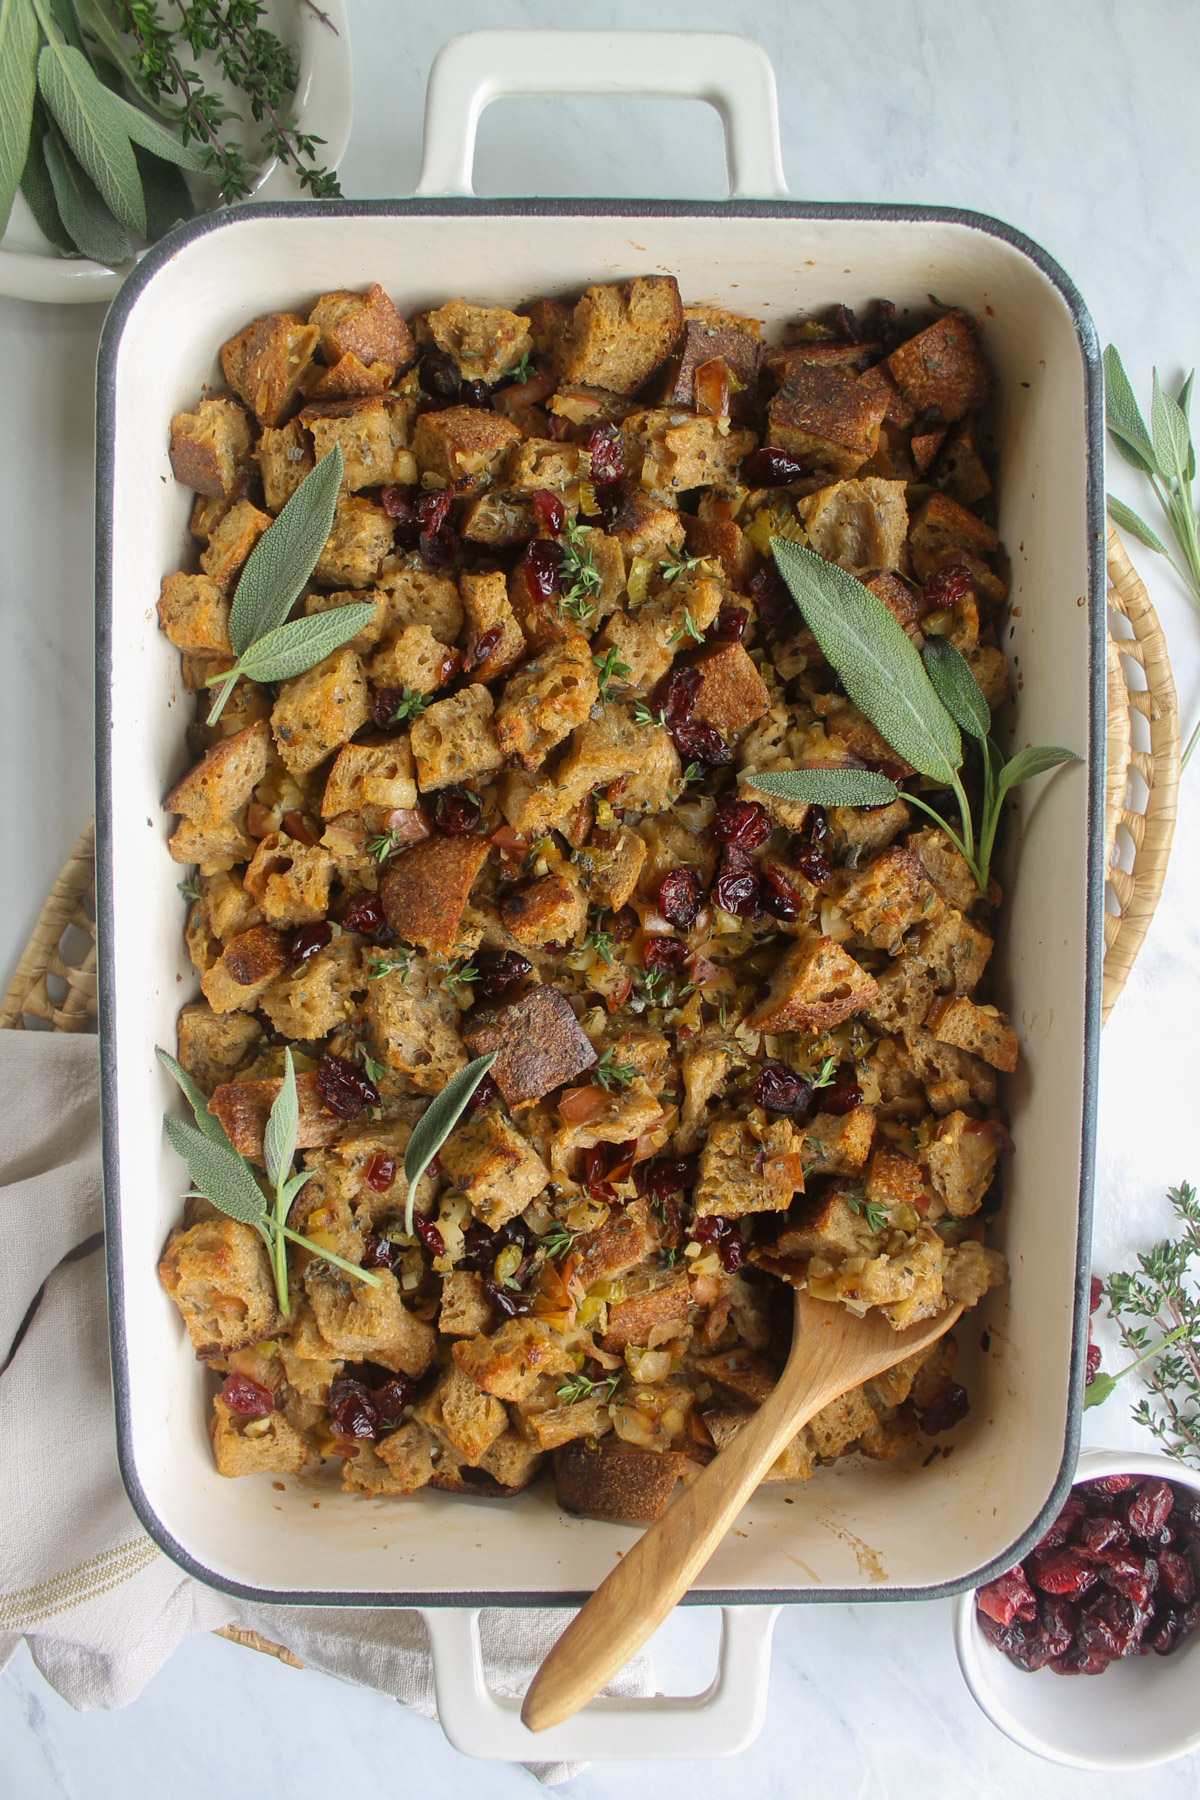 The baked Cranberry Herb Bread Stuffing garnished with fresh sage leaves.